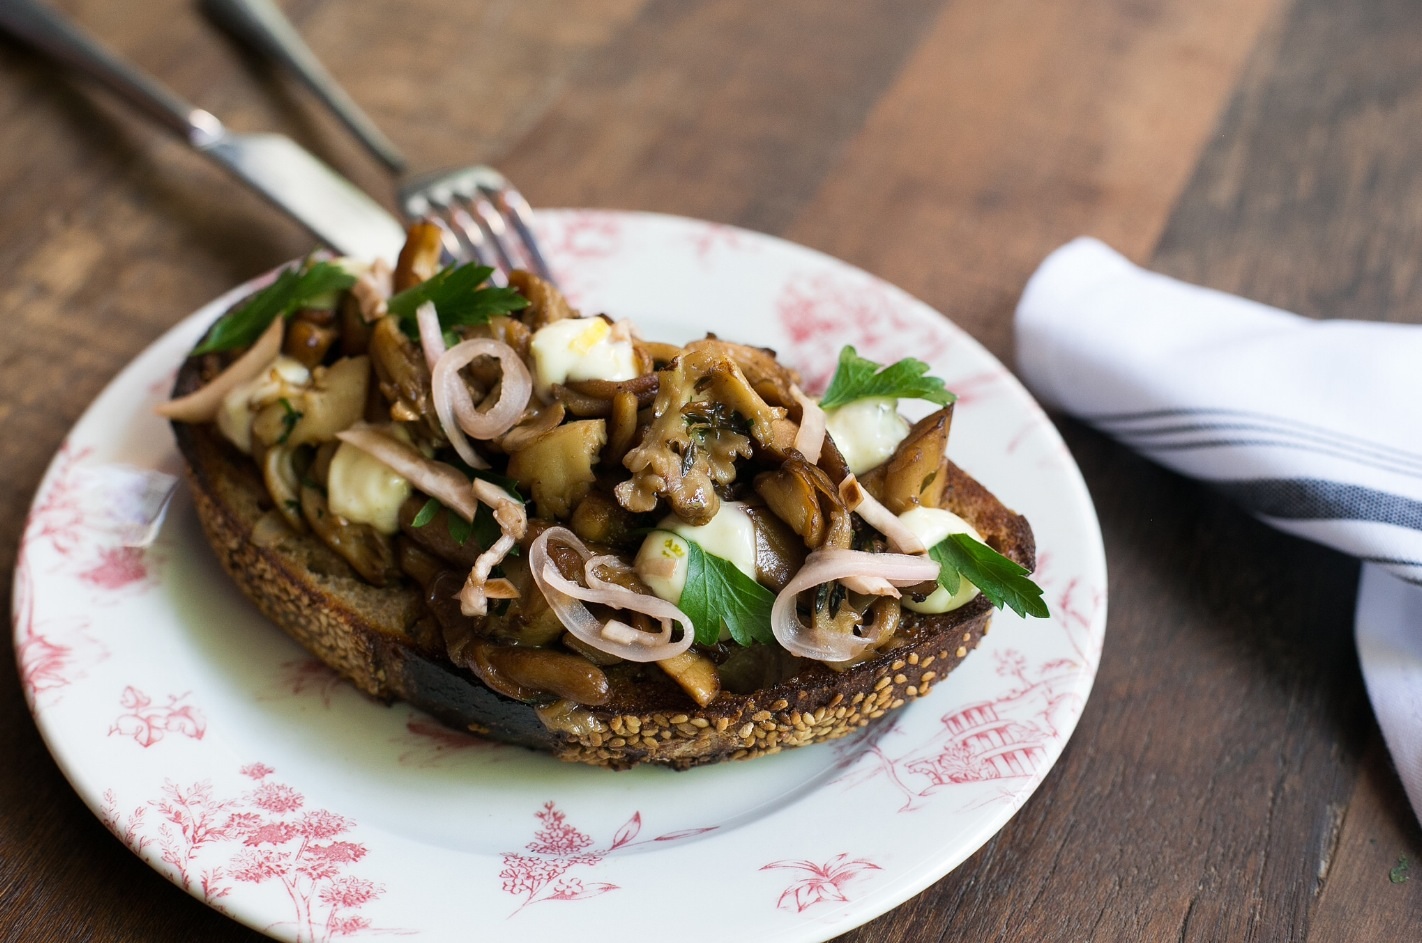 Highline Mushroom's on toast: With pickled eggplant & herbs $15 + add smoked trout $4